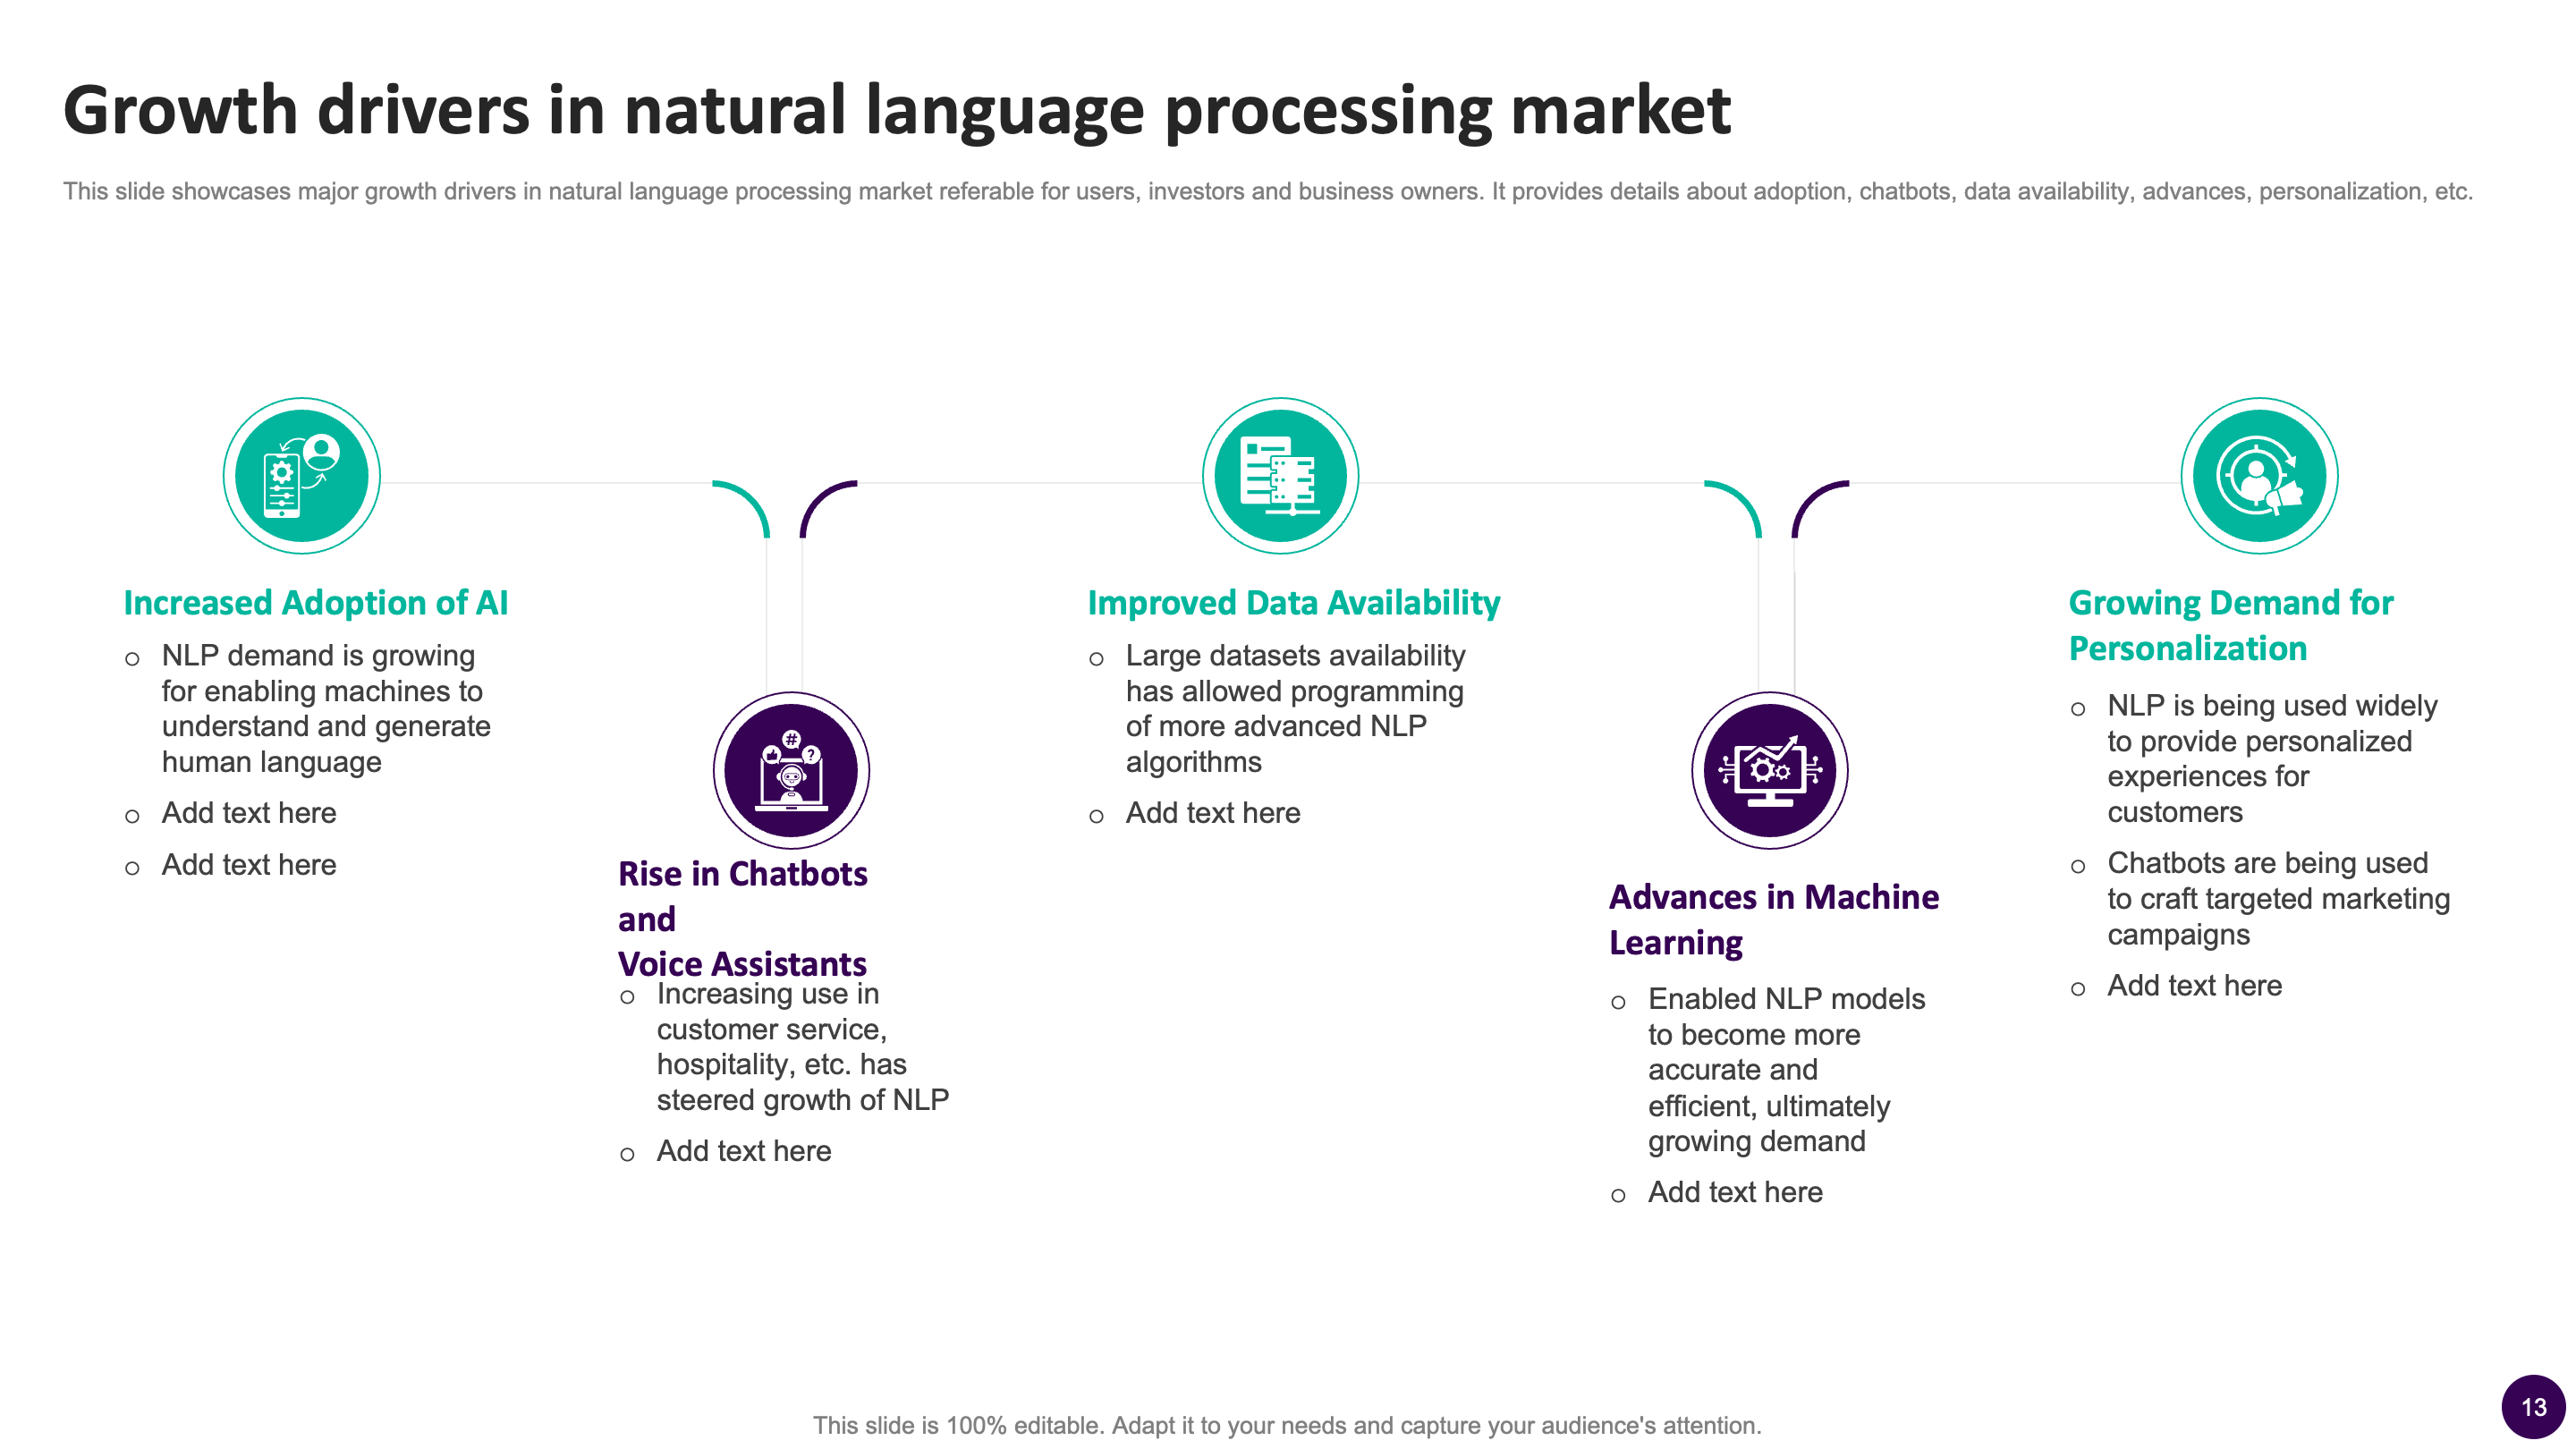 Growth Drivers in Natural Language Processing Market